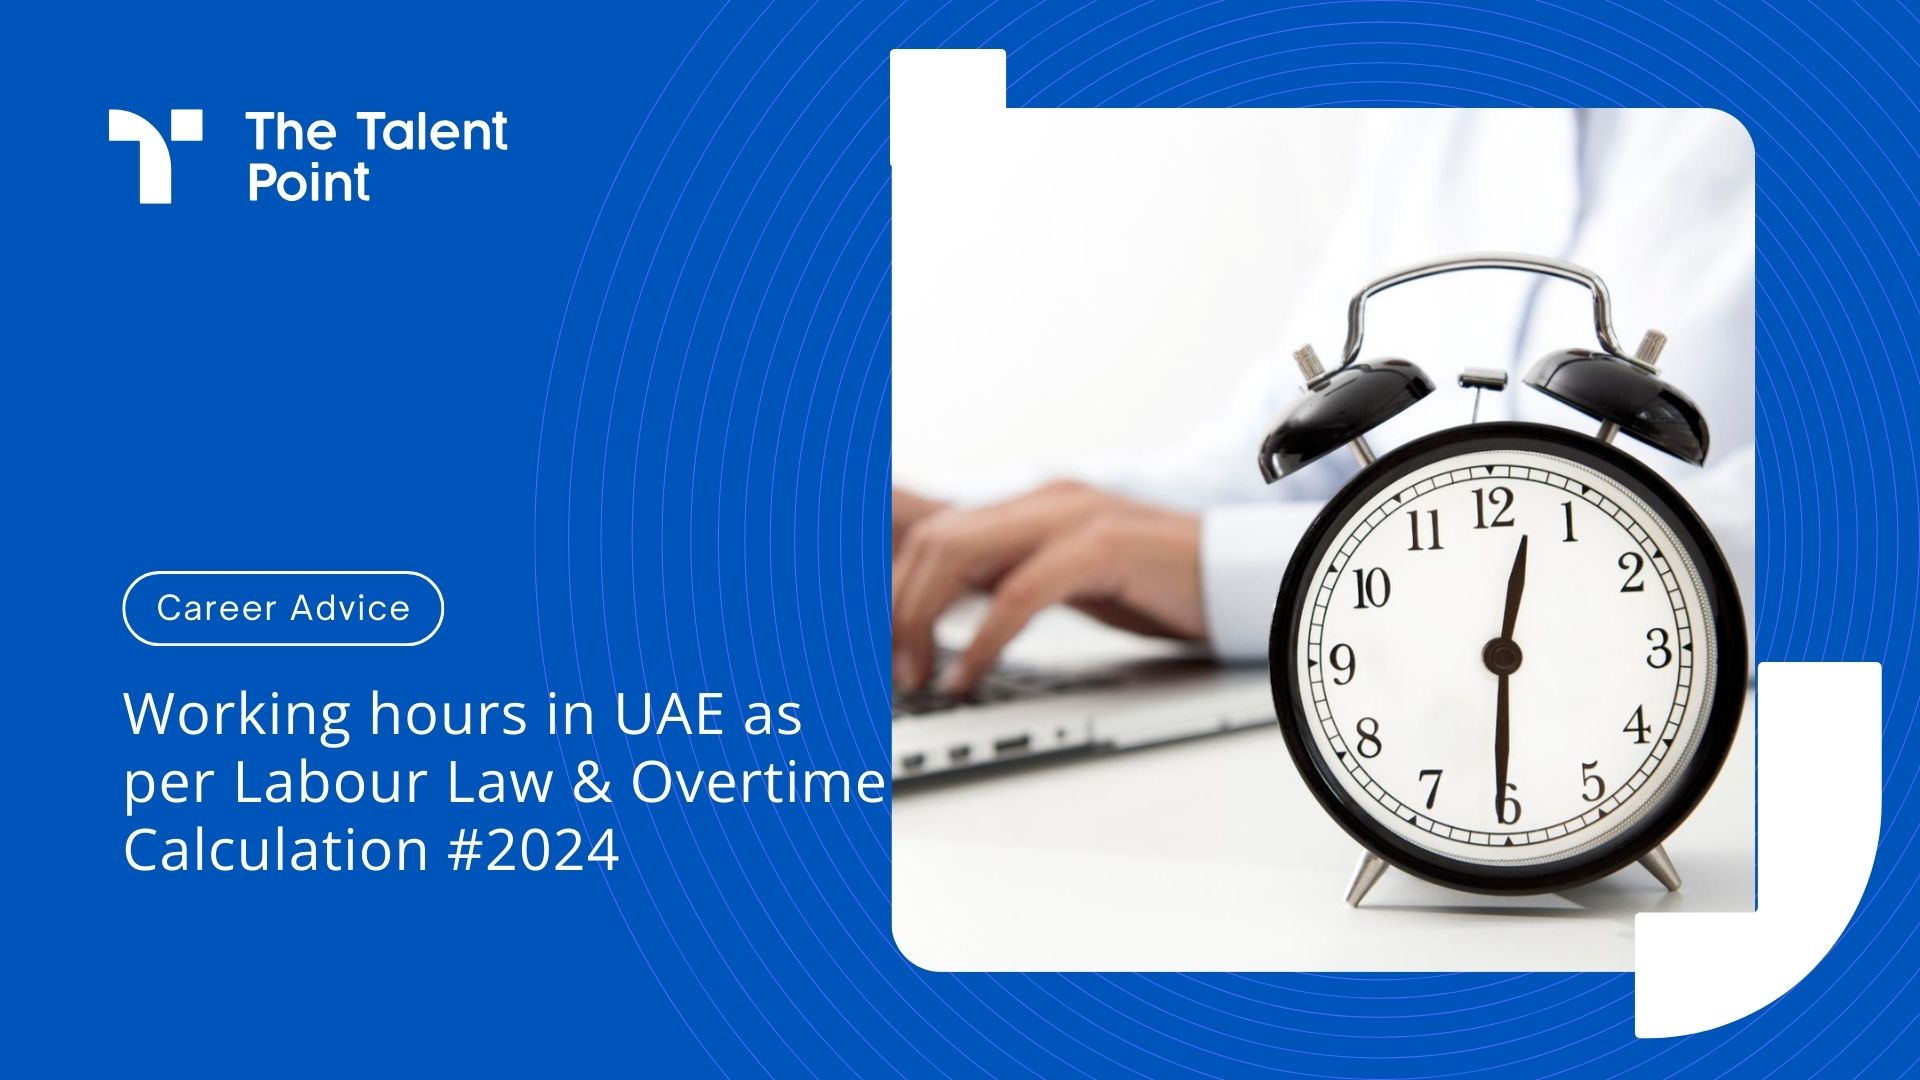 Working hours in UAE as per Labour Law & Overtime Calculation #2024